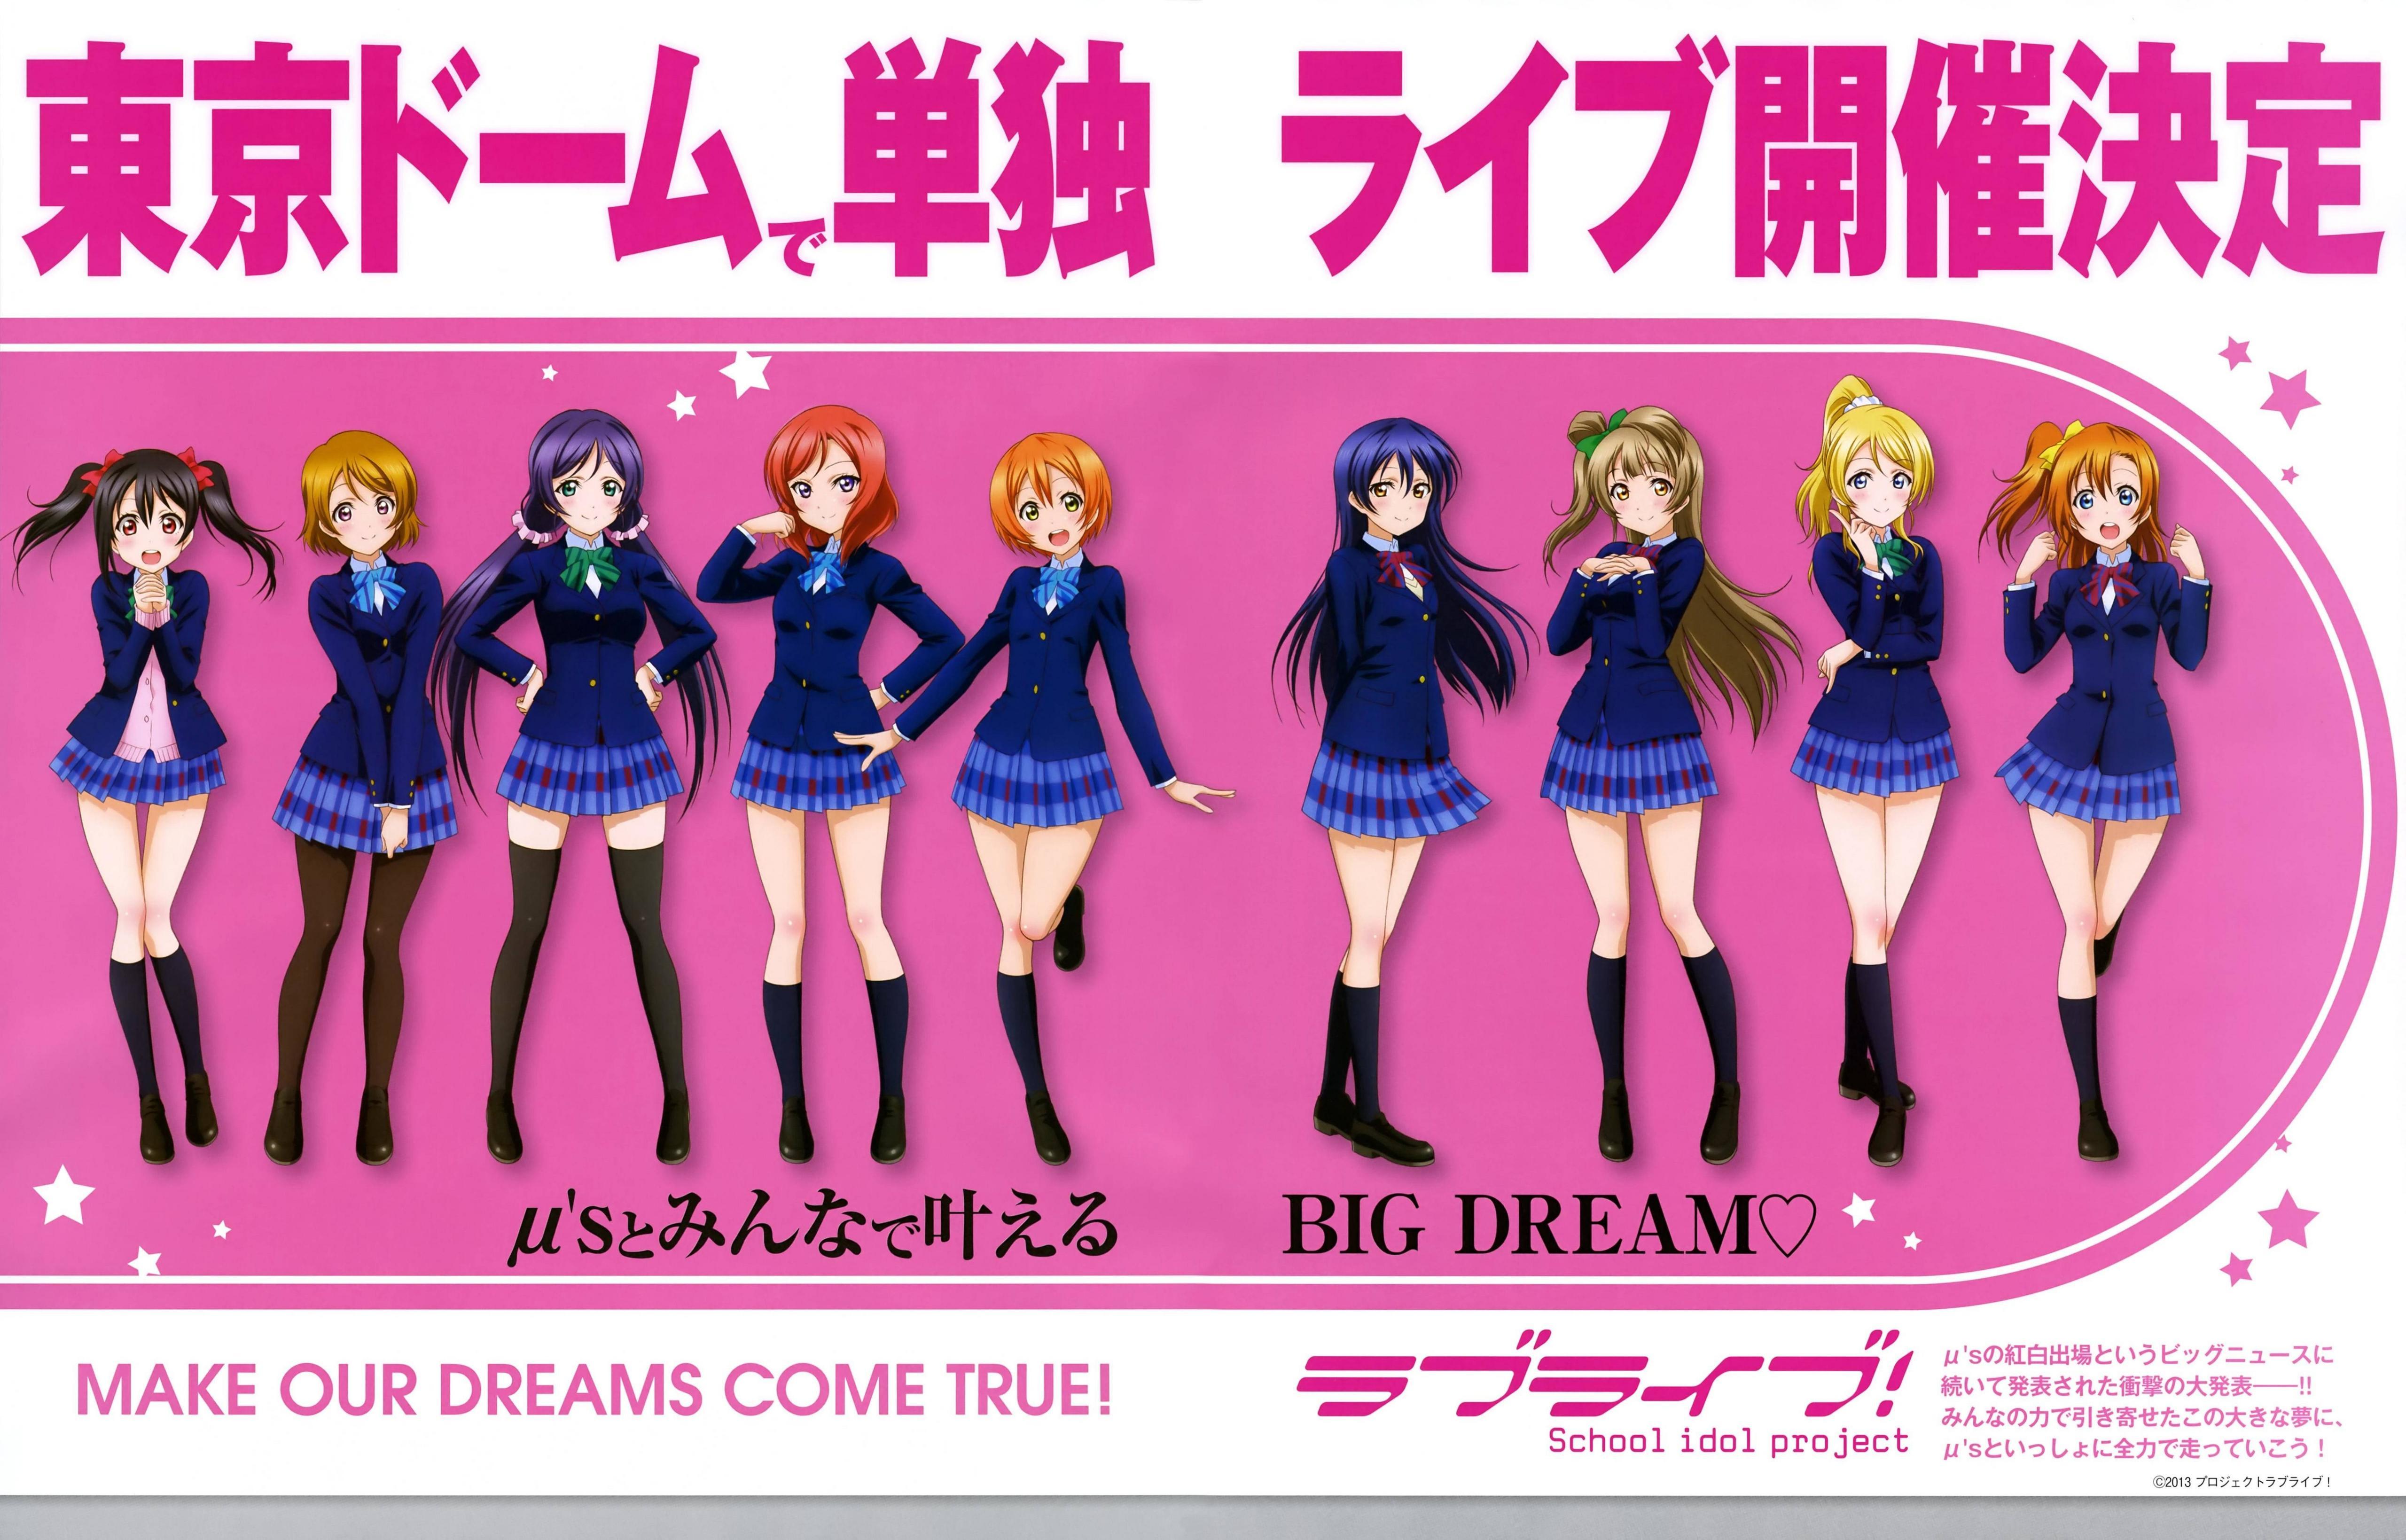 Awesome Love Live! free background for HD 6400x4096 desktop